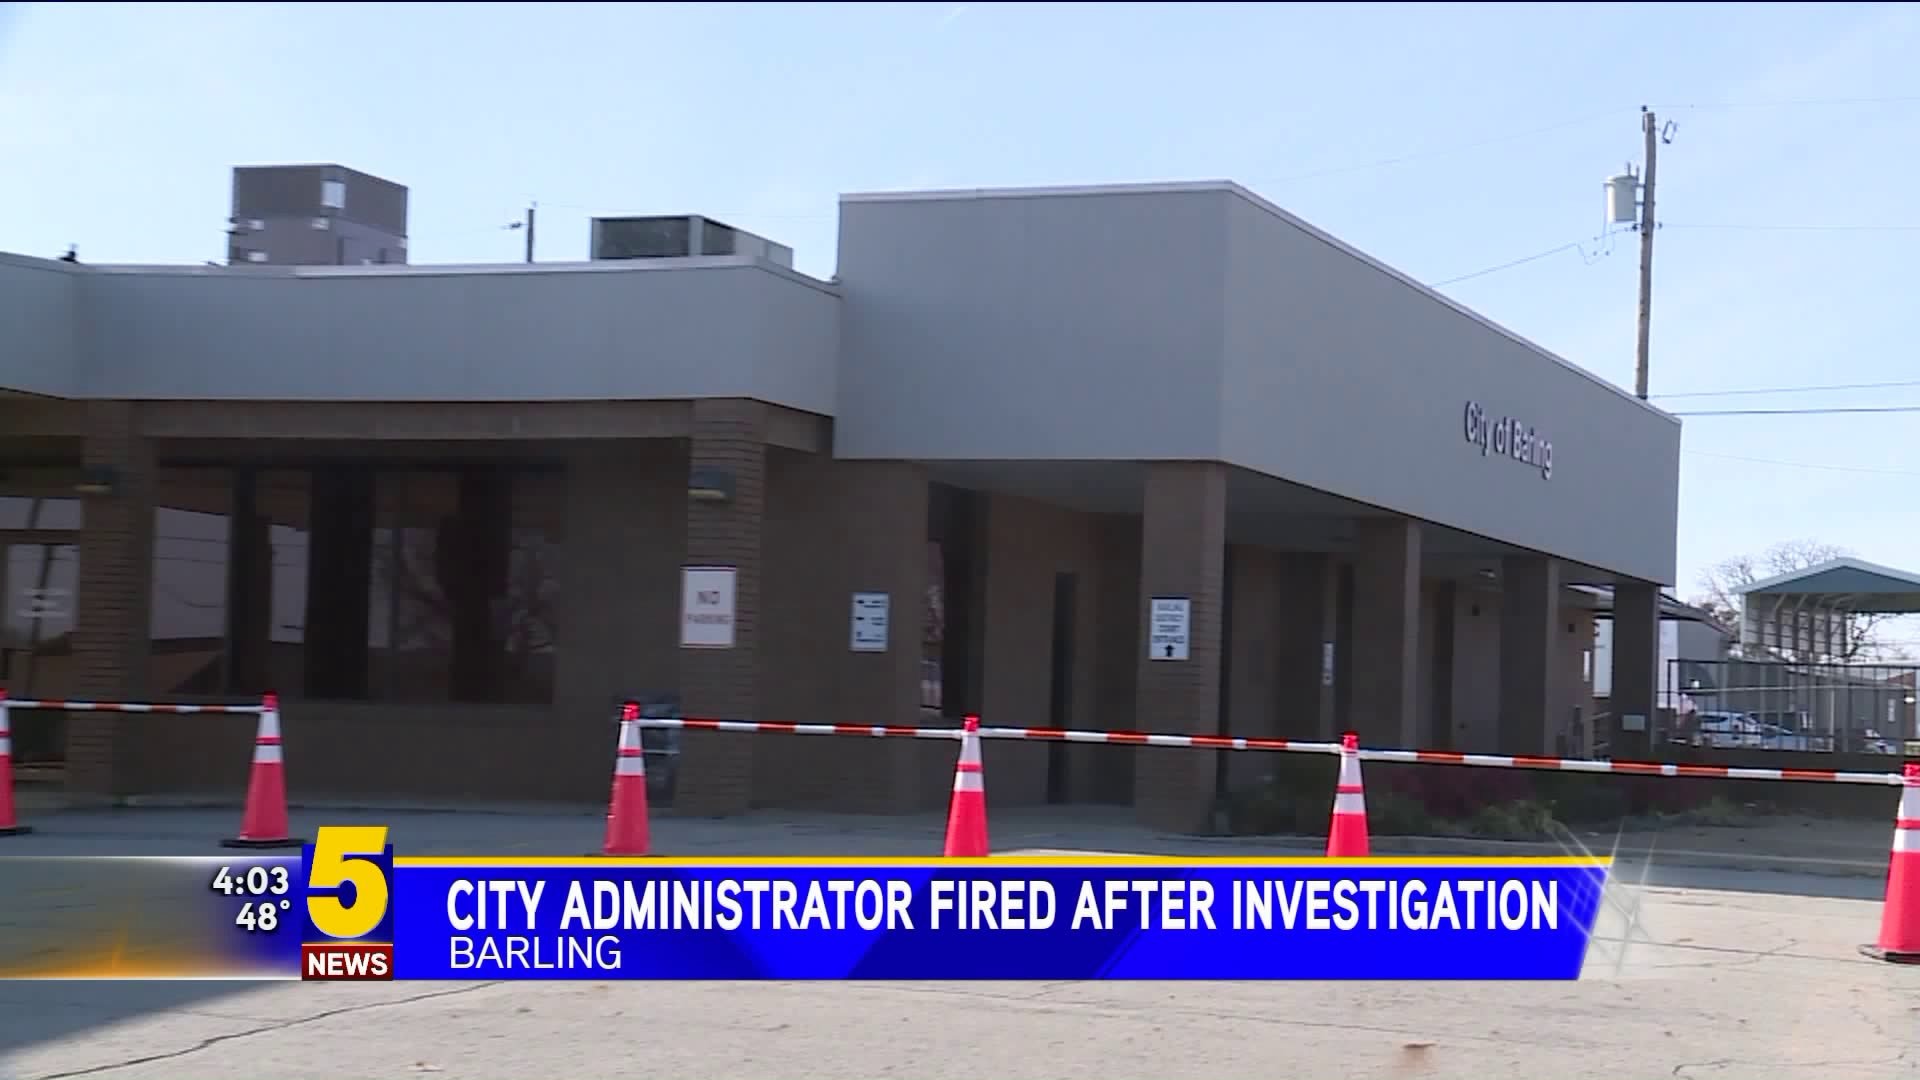 Barling City Administrator Fired After Investigation